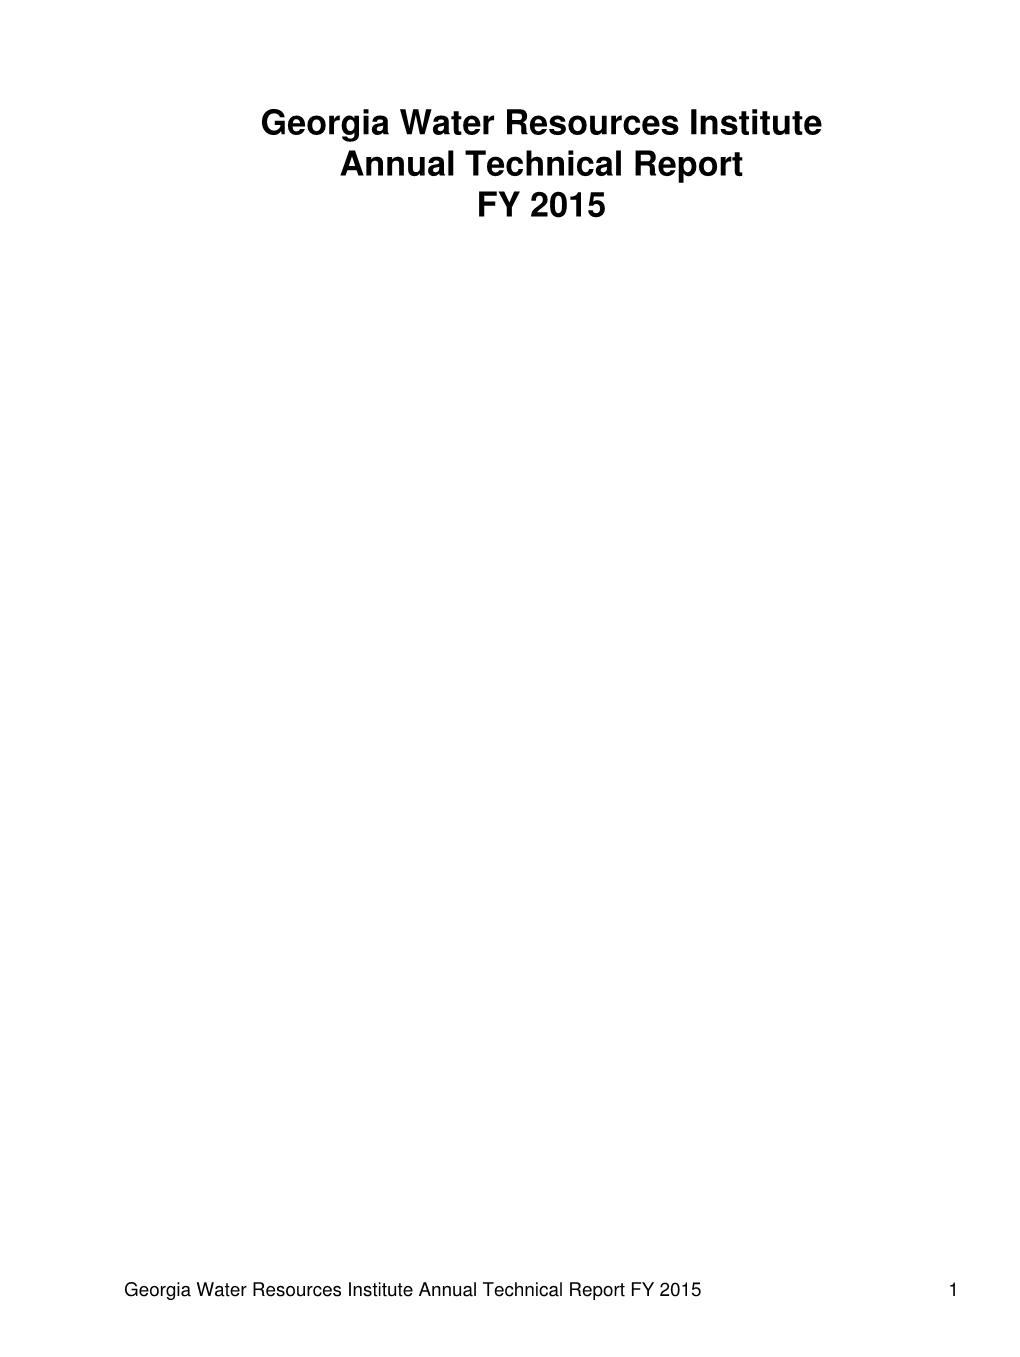 Georgia Water Resources Institute Annual Technical Report FY 2015